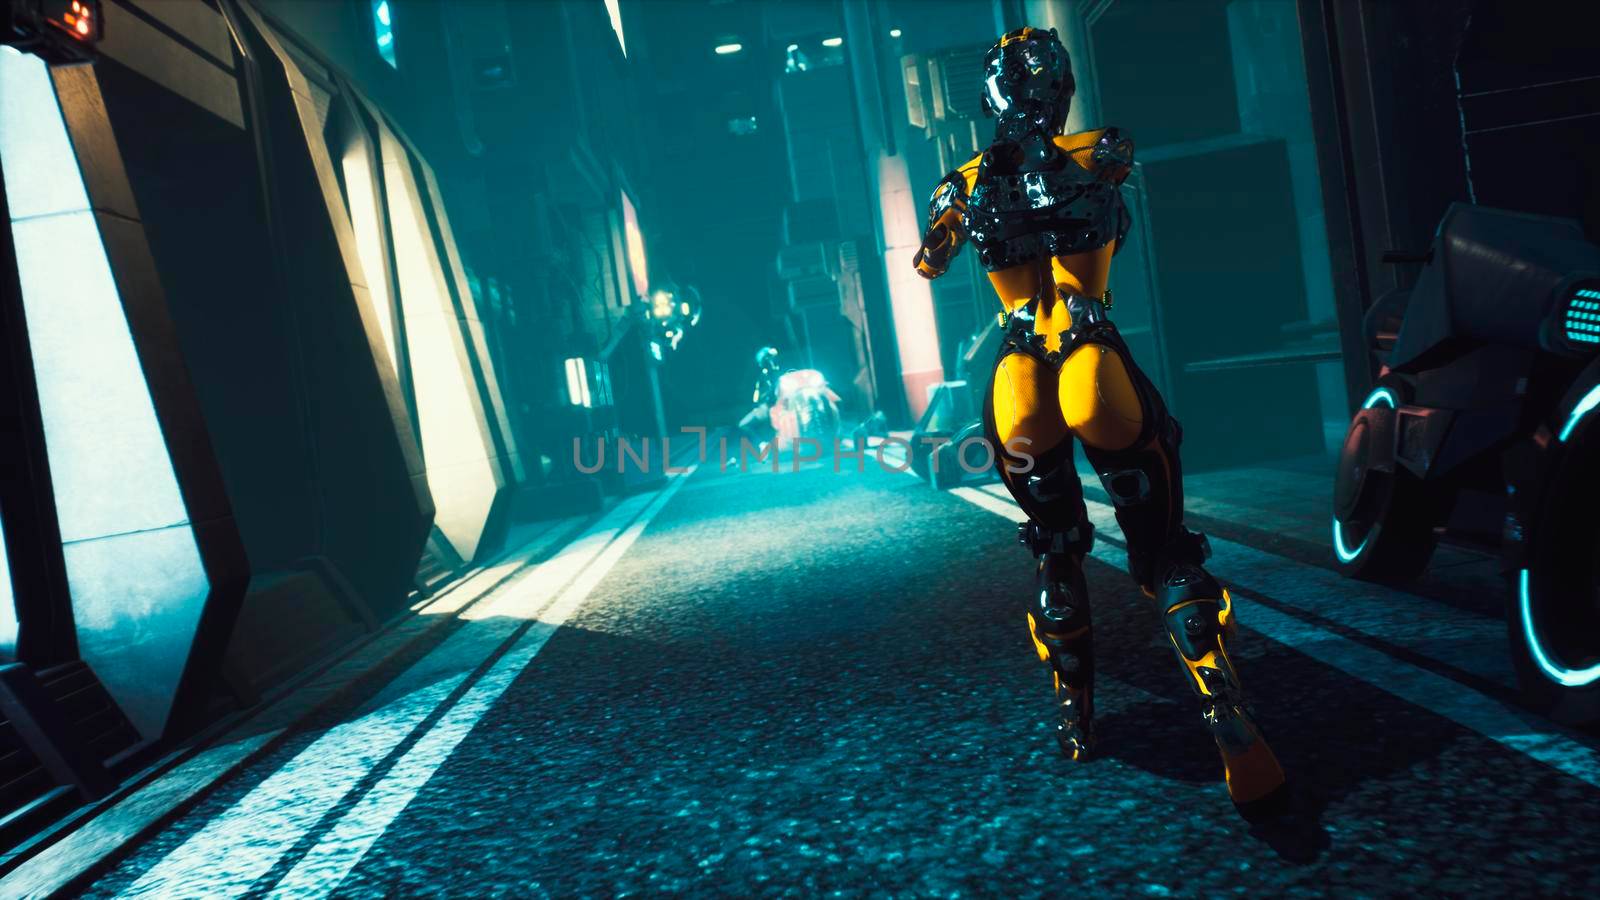 Cyber soldier walks through the dark streets of the cyber city of the future. View of an future fiction city. Post-apocalyptic cyber world concept.